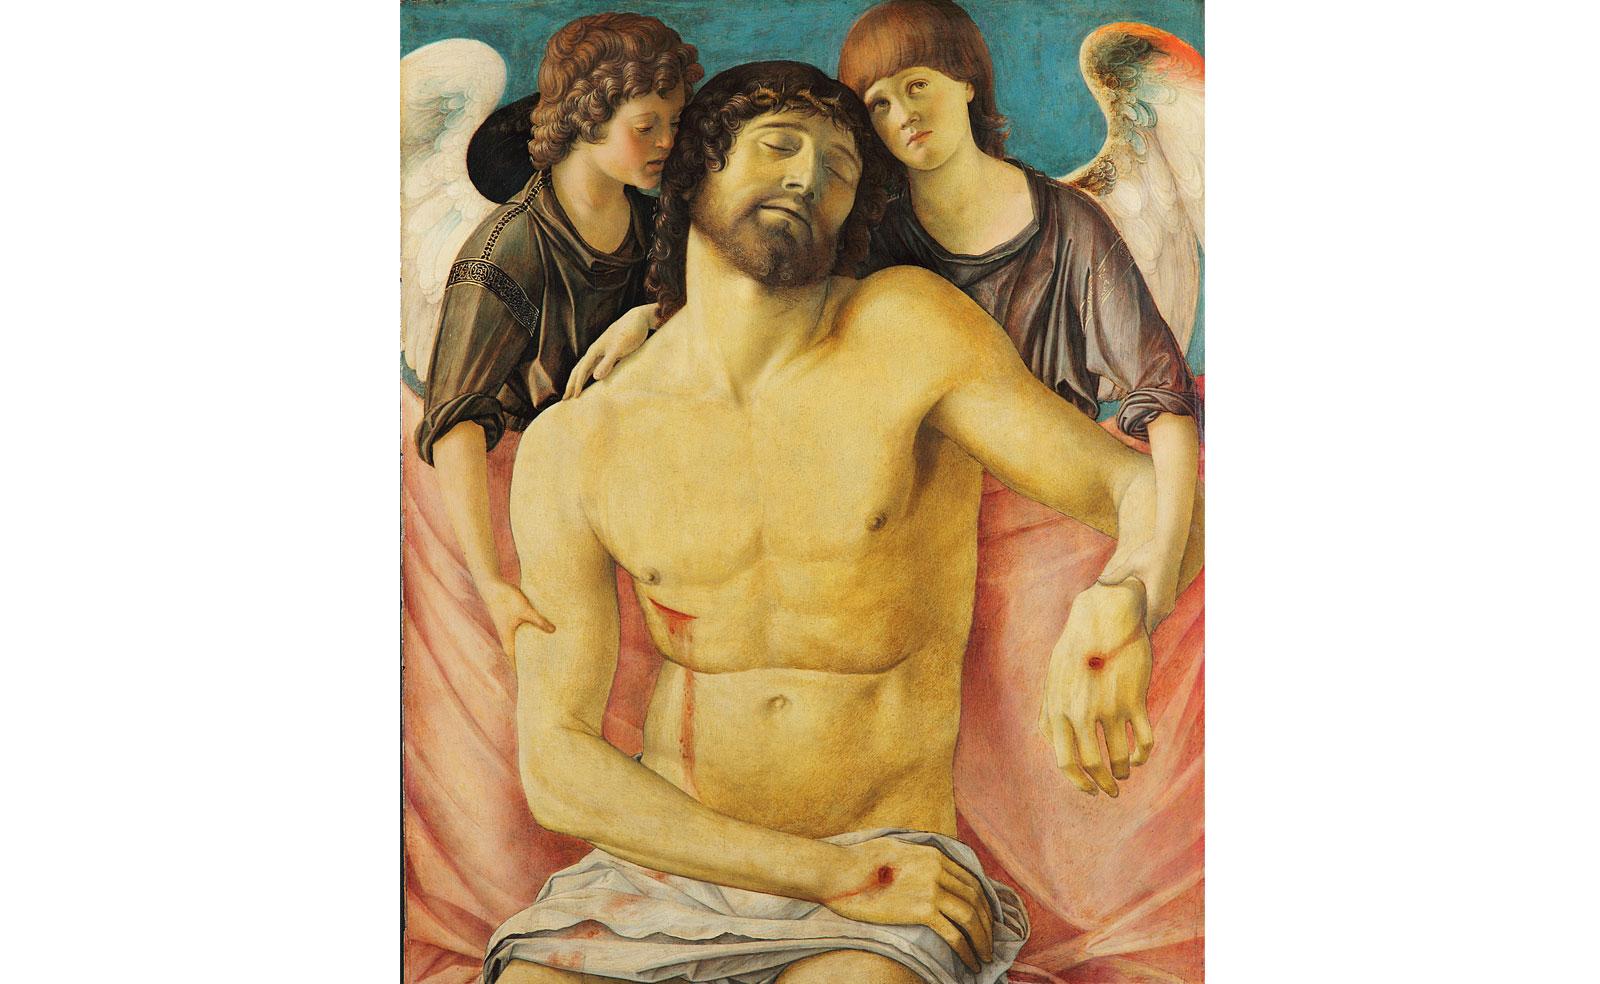 Dead Christ supported by angels by Giovanni Bellini.